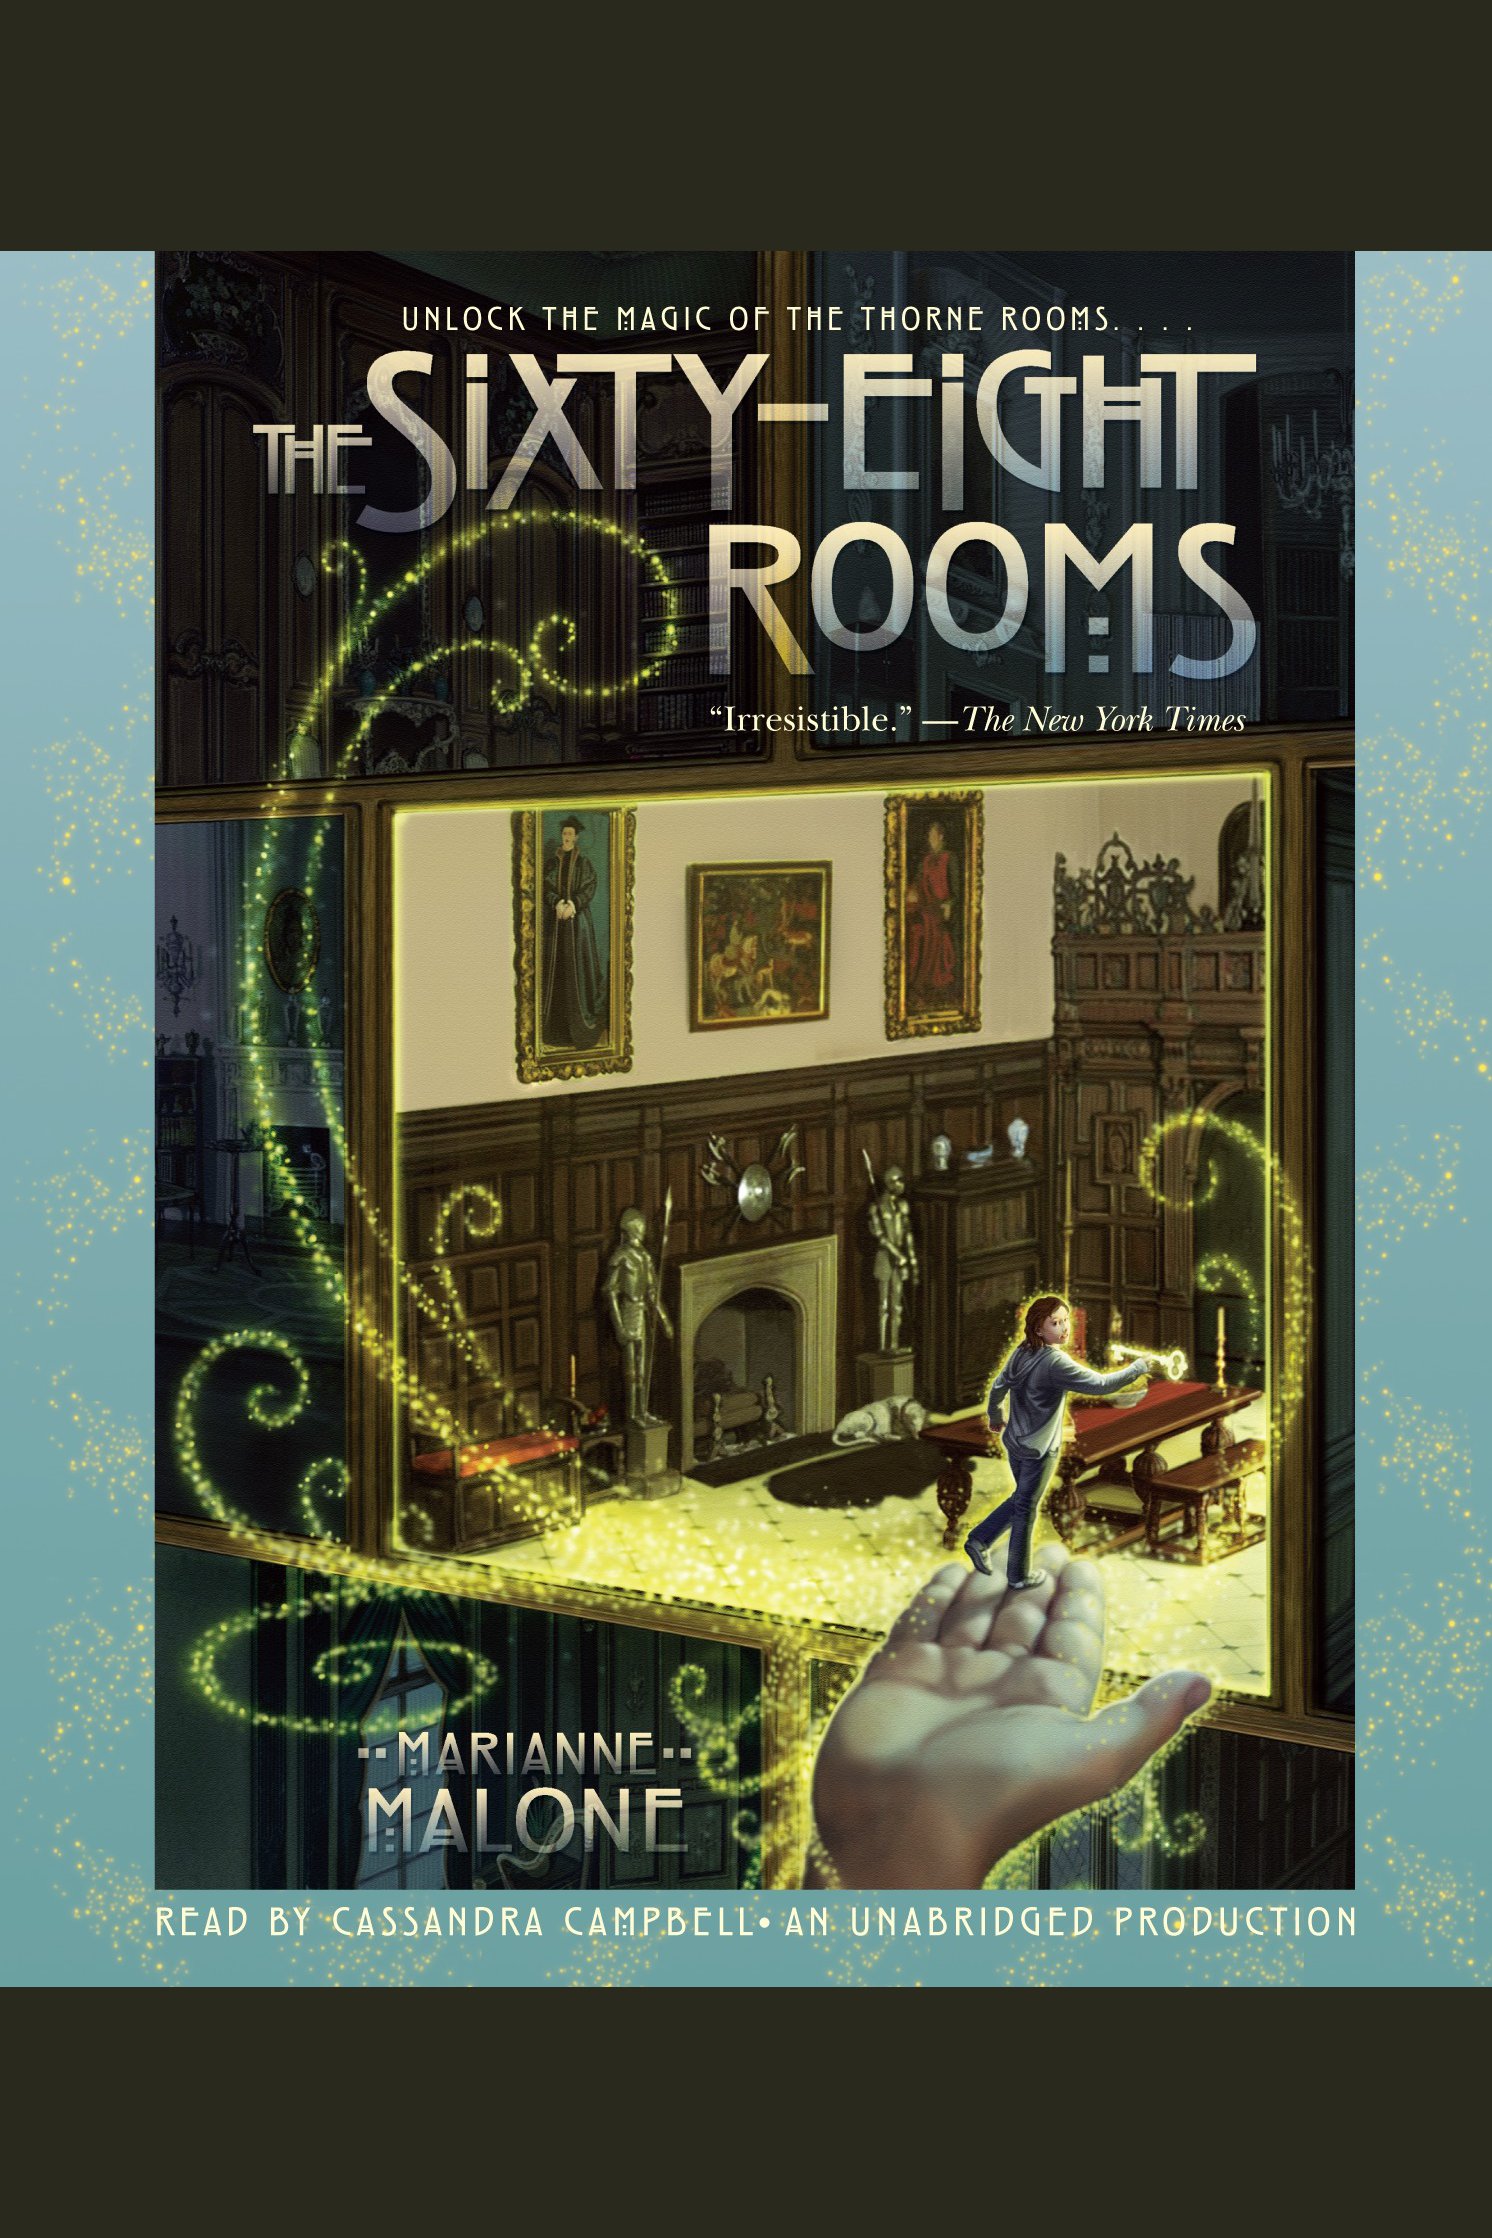 The sixty-eight rooms cover image